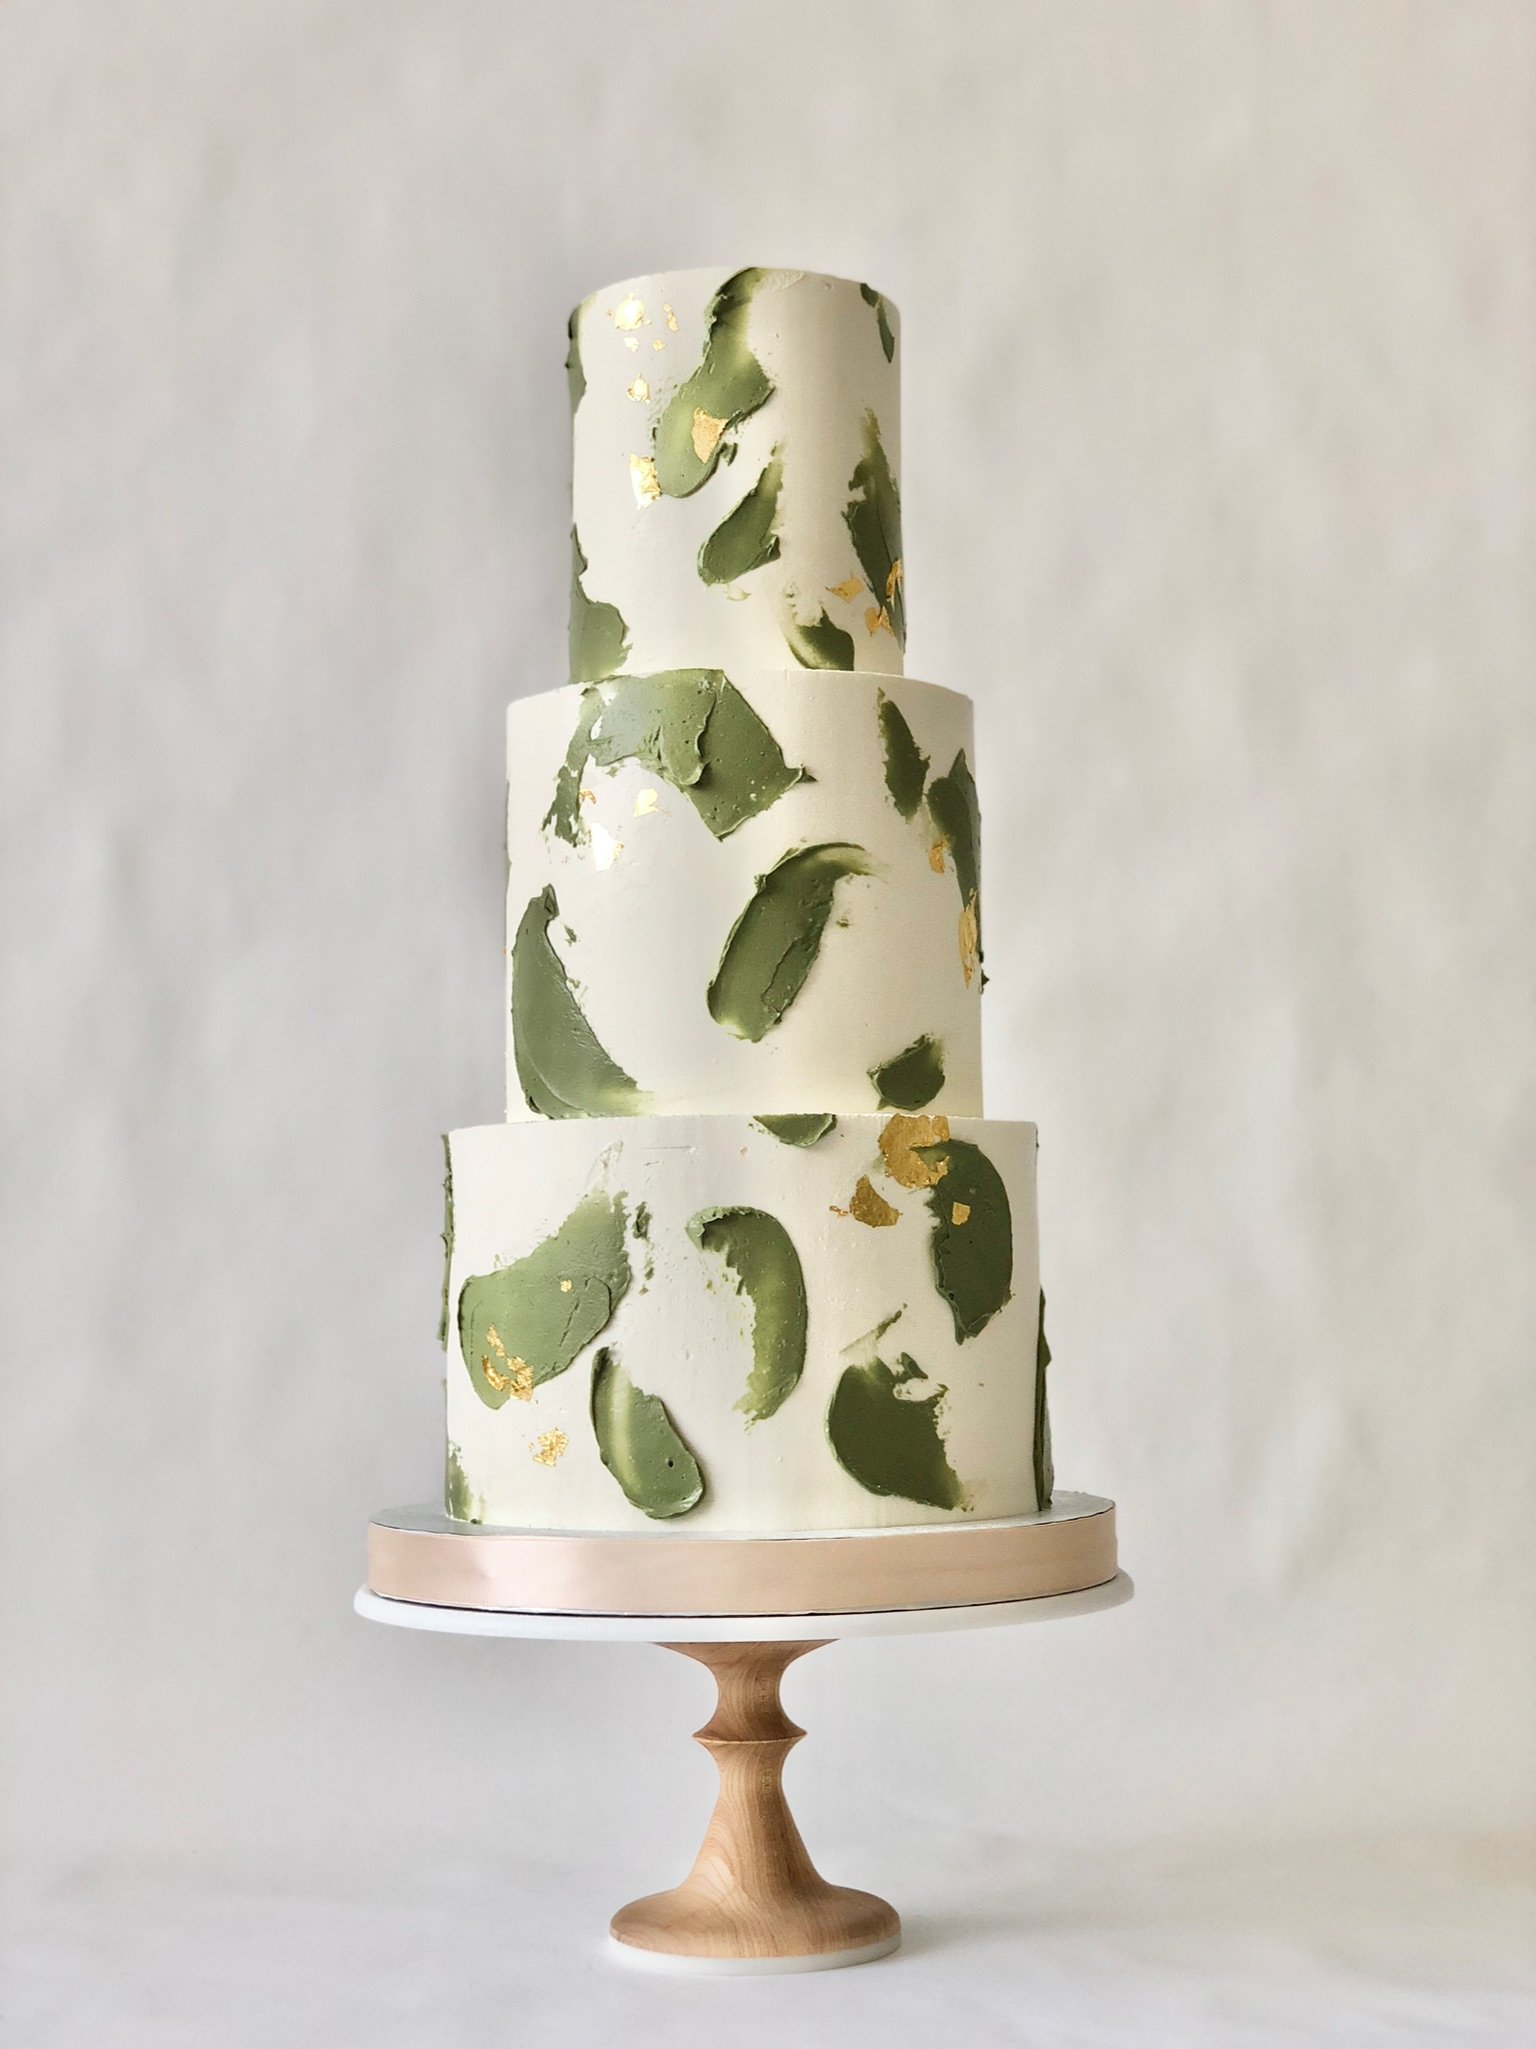  3-Tier Cake with paint design on the outside 